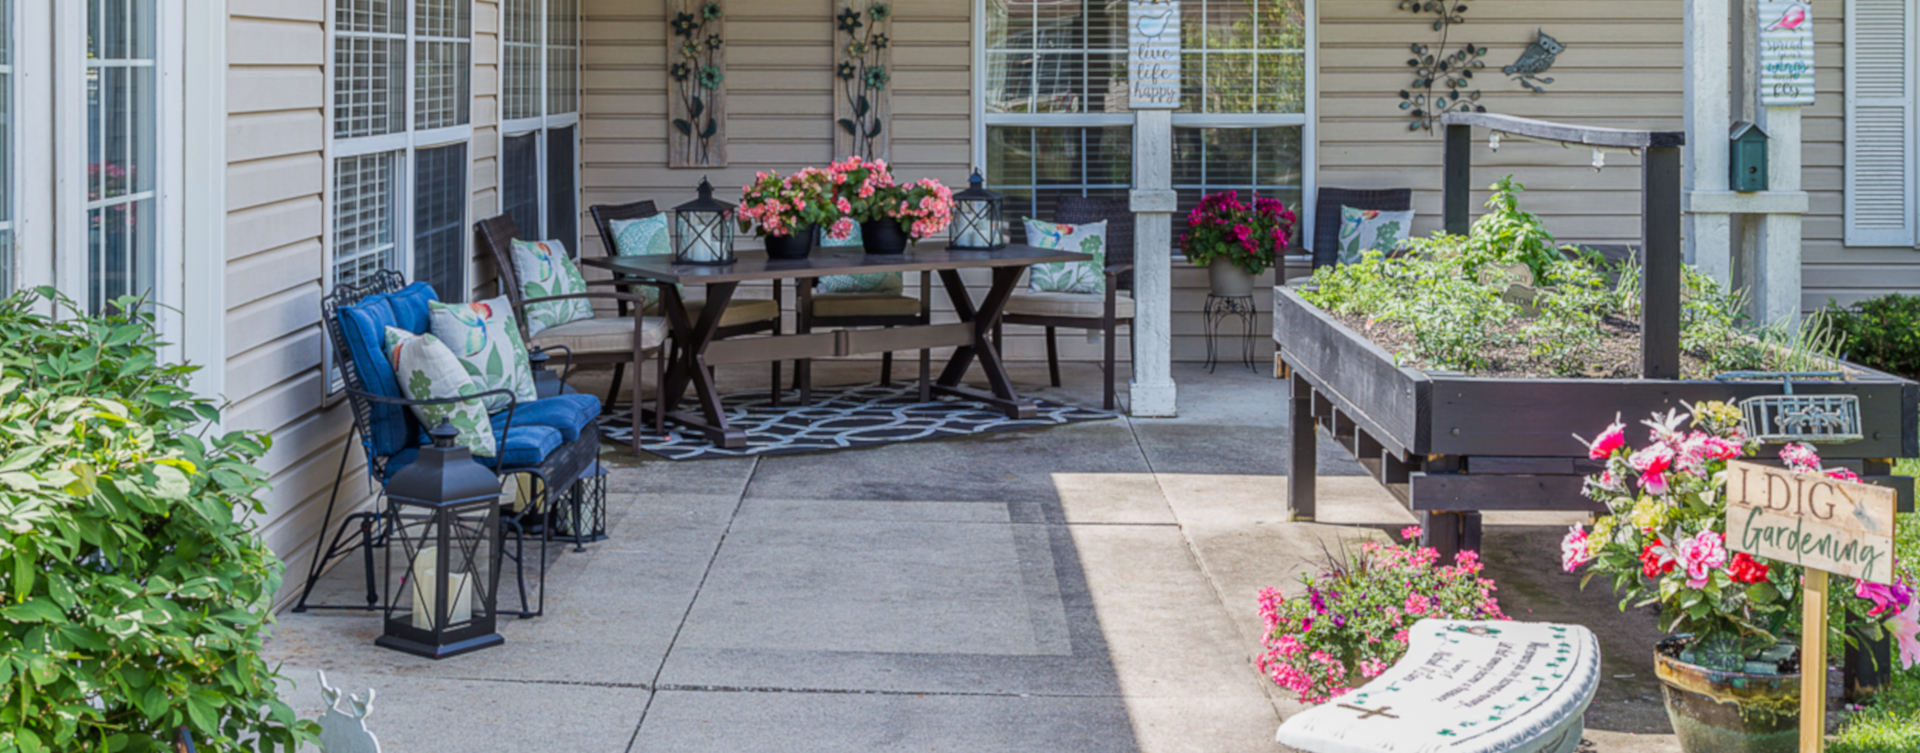 Enjoy bird watching, gardening and barbecuing in our courtyard at Bickford of Urbandale